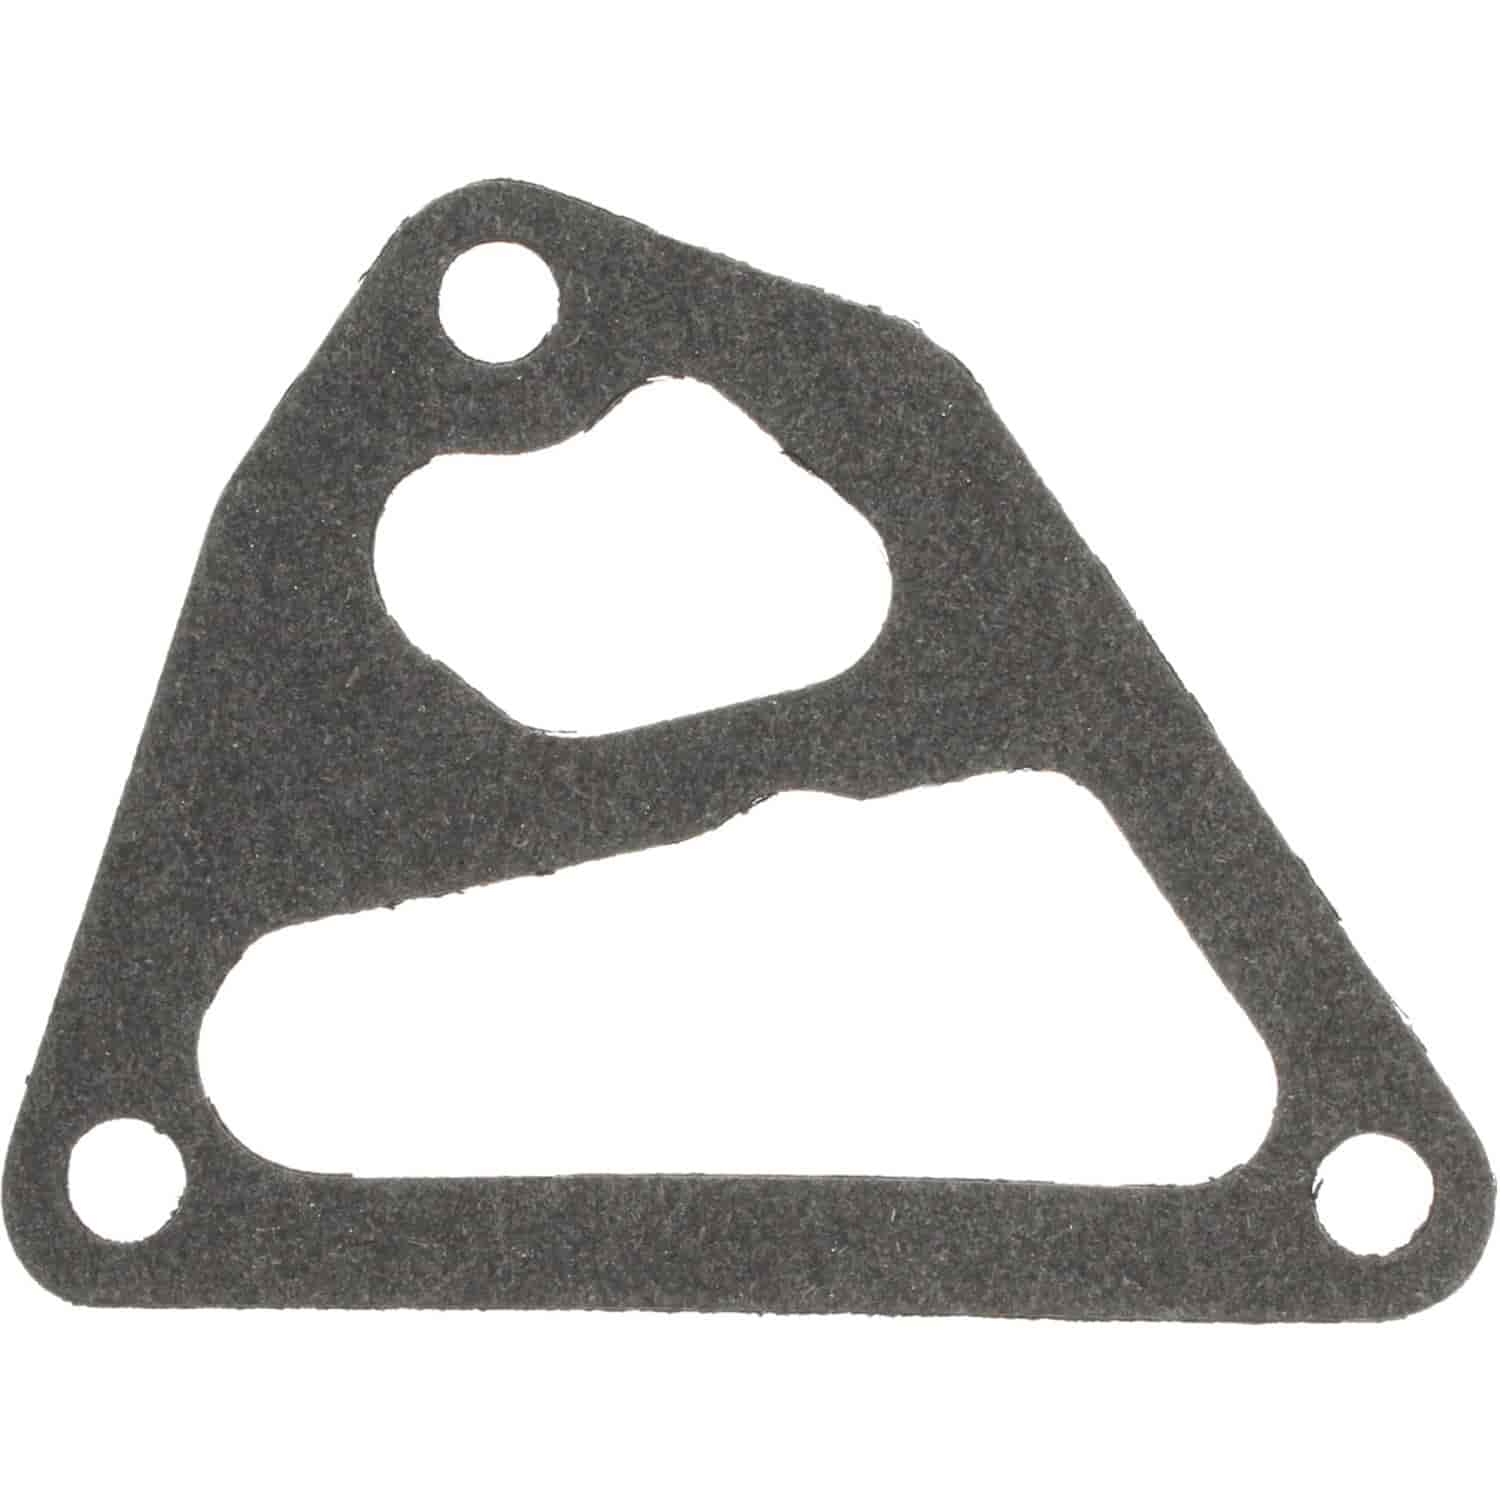 Oil Pump Gasket Ed Ford-Pass Trk&Ind Merc 239 256 272 279 289 292 302 312 317 332 46-68 oi